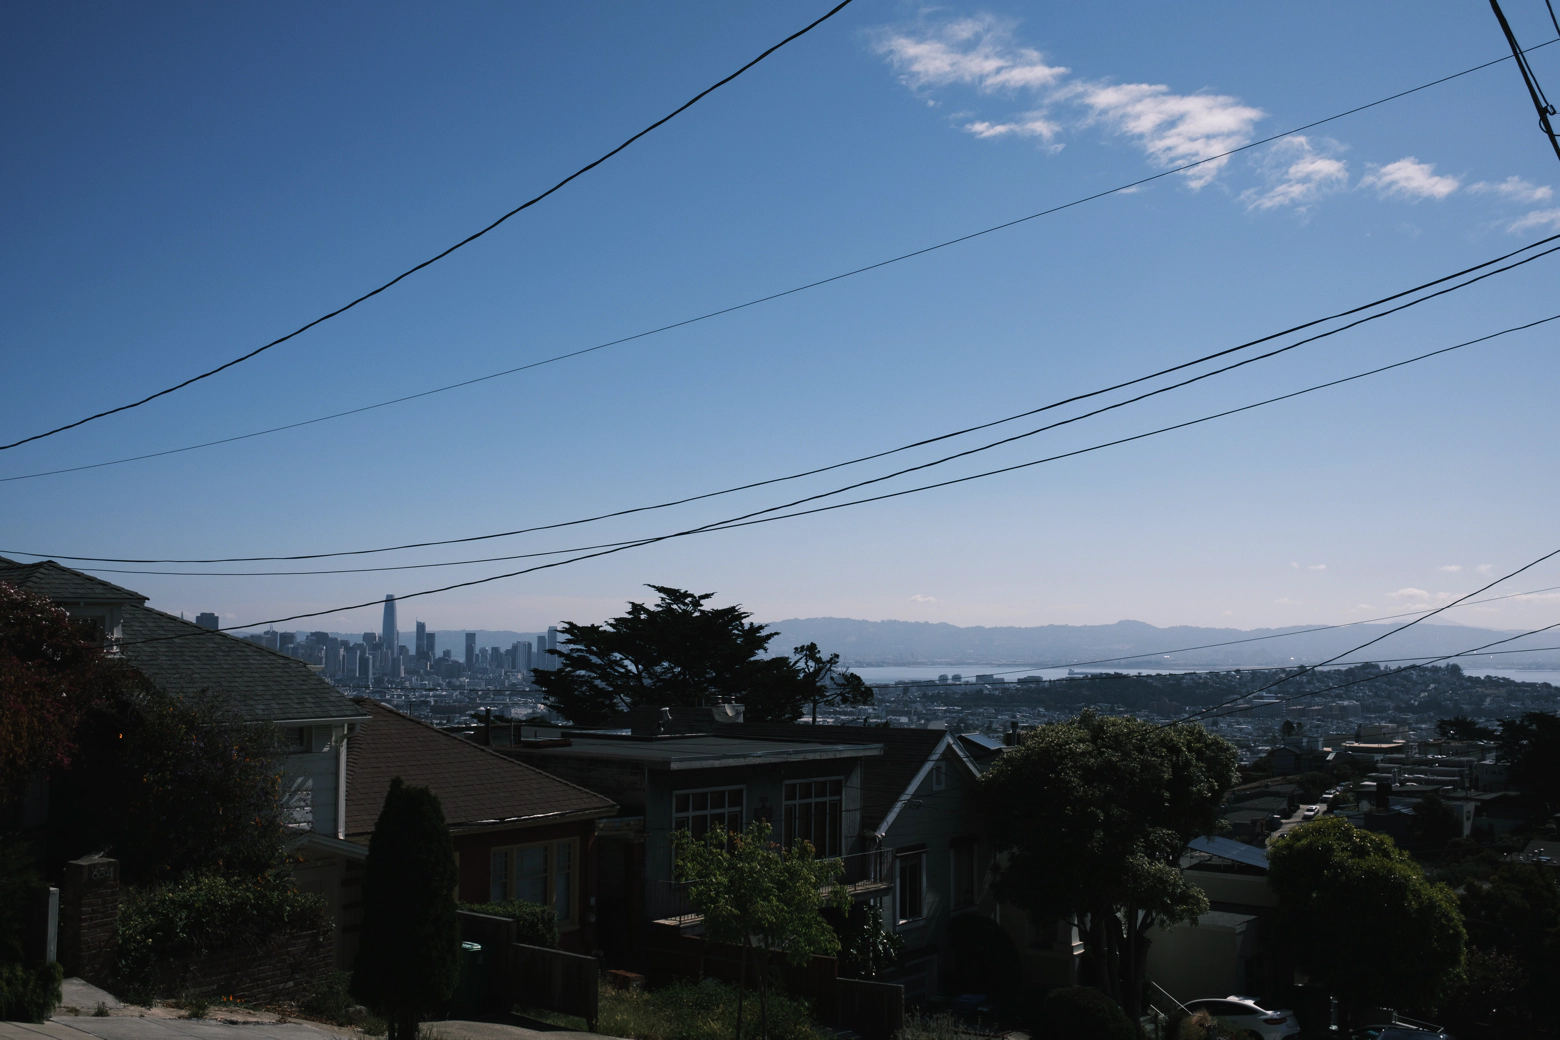 A lazy Sunday perfectly captured: criss-crossing electrical lines, a great blue sky, the hills of Noe Valley in San Francisco.